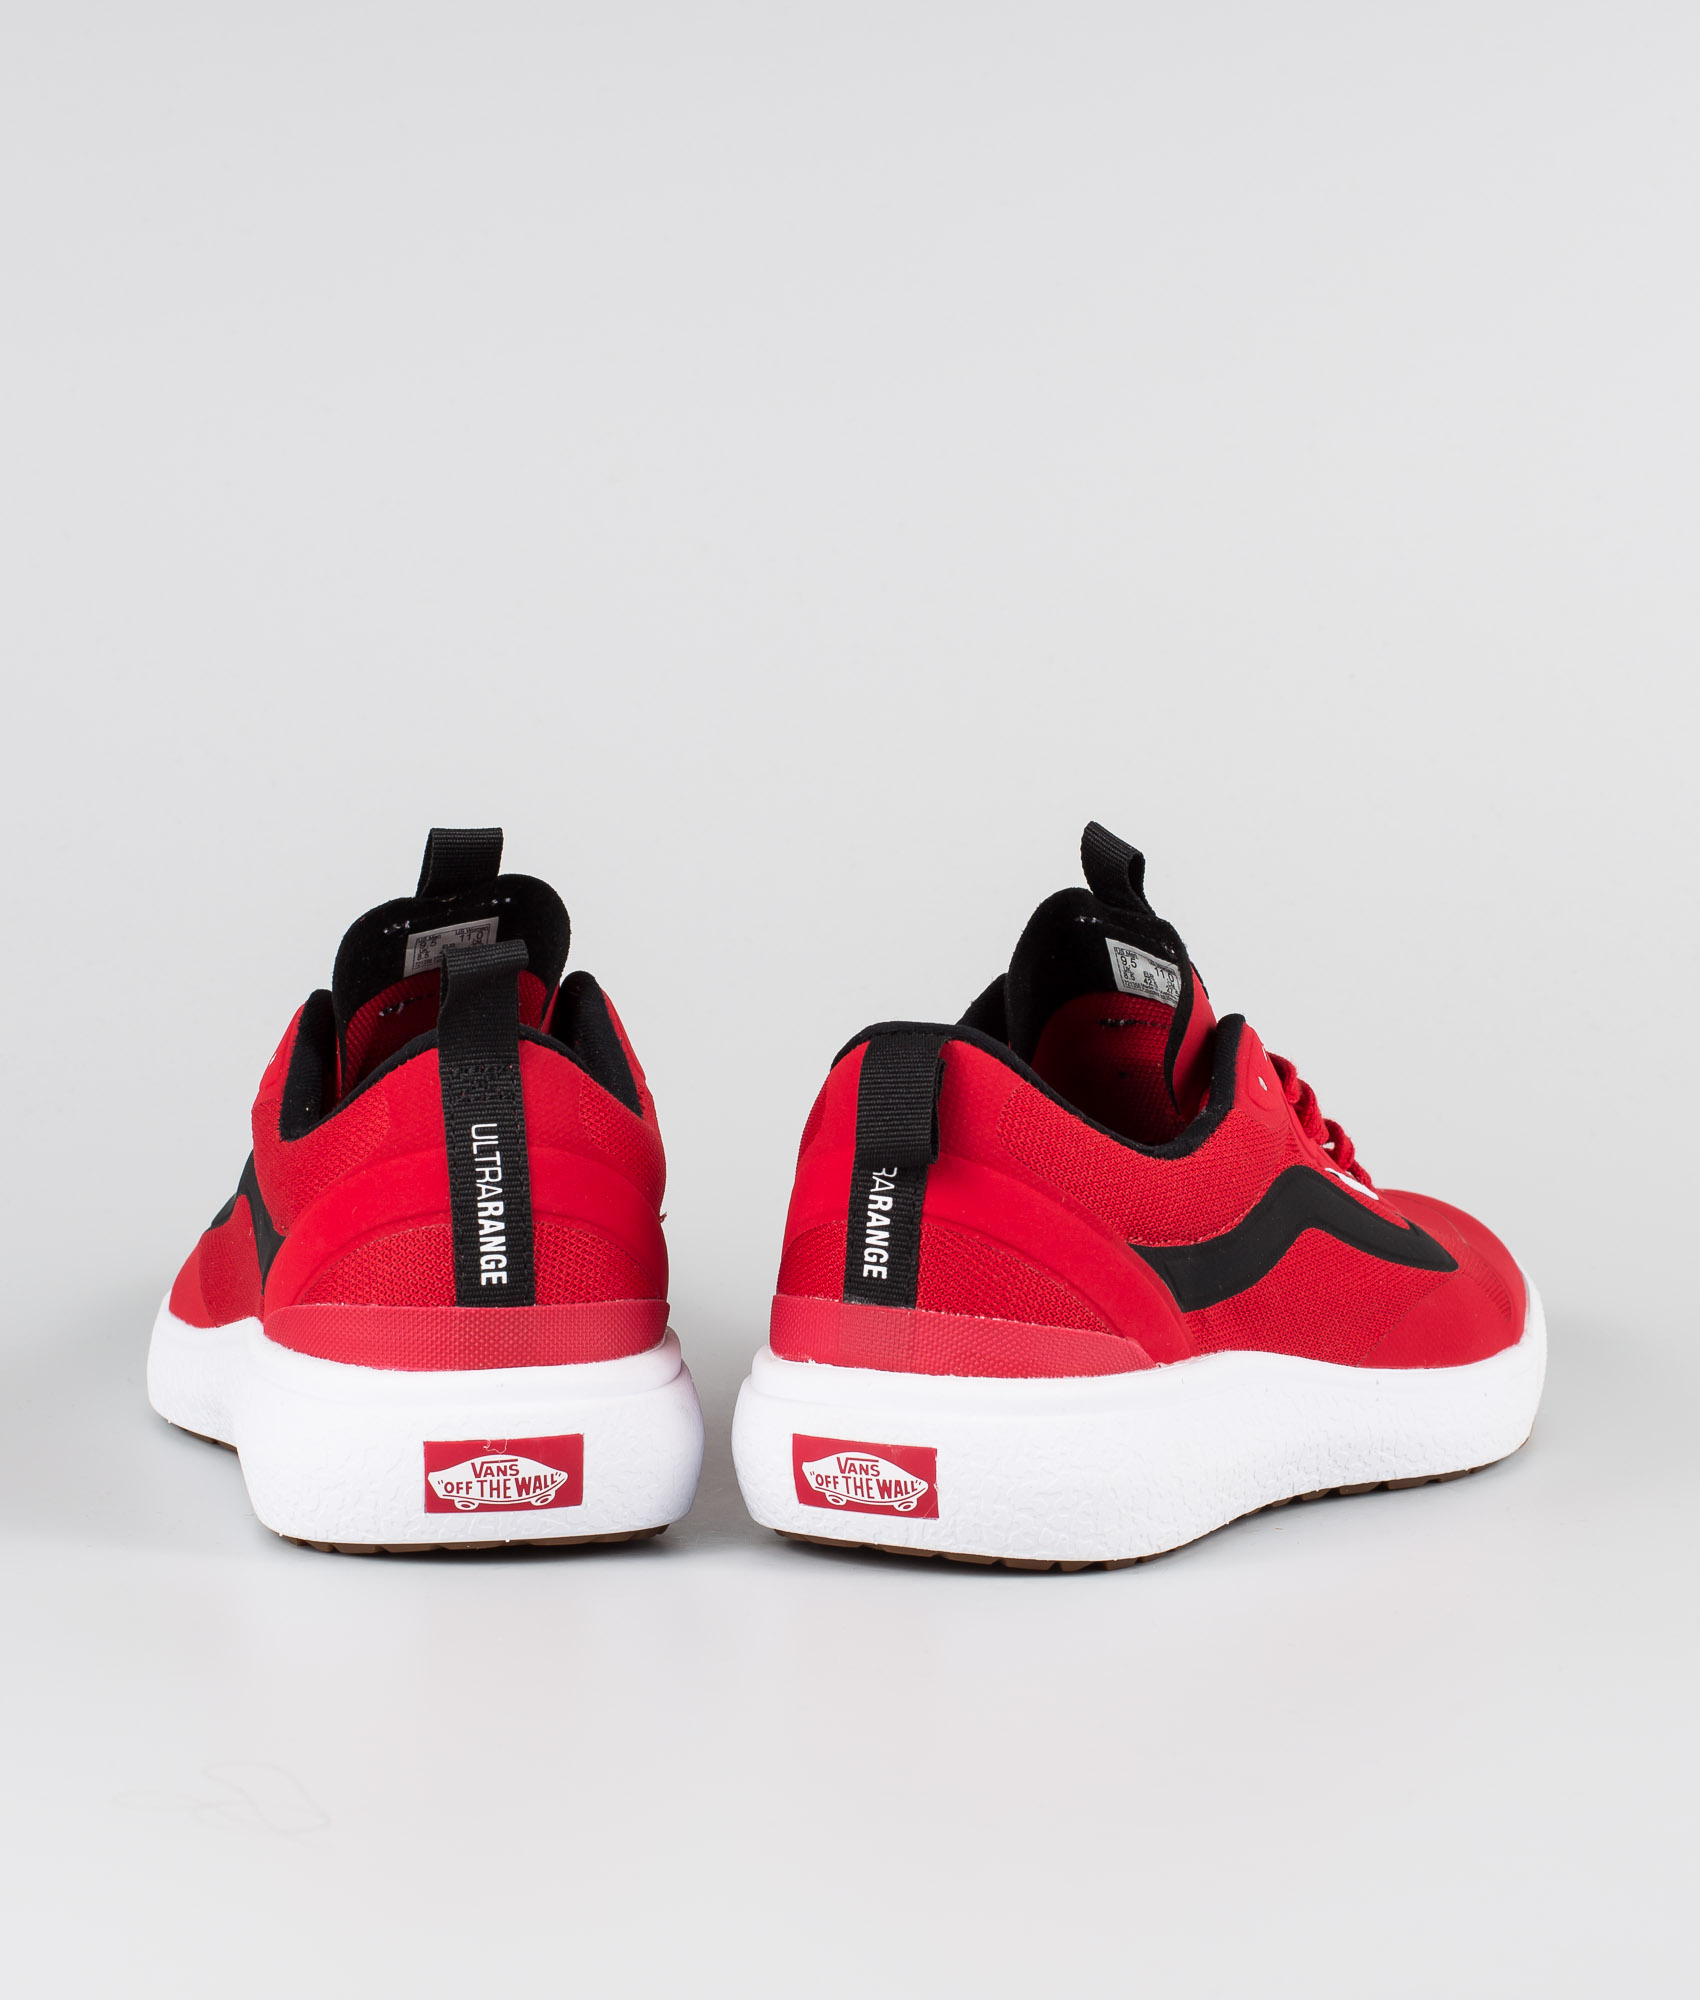 vans off the wall red